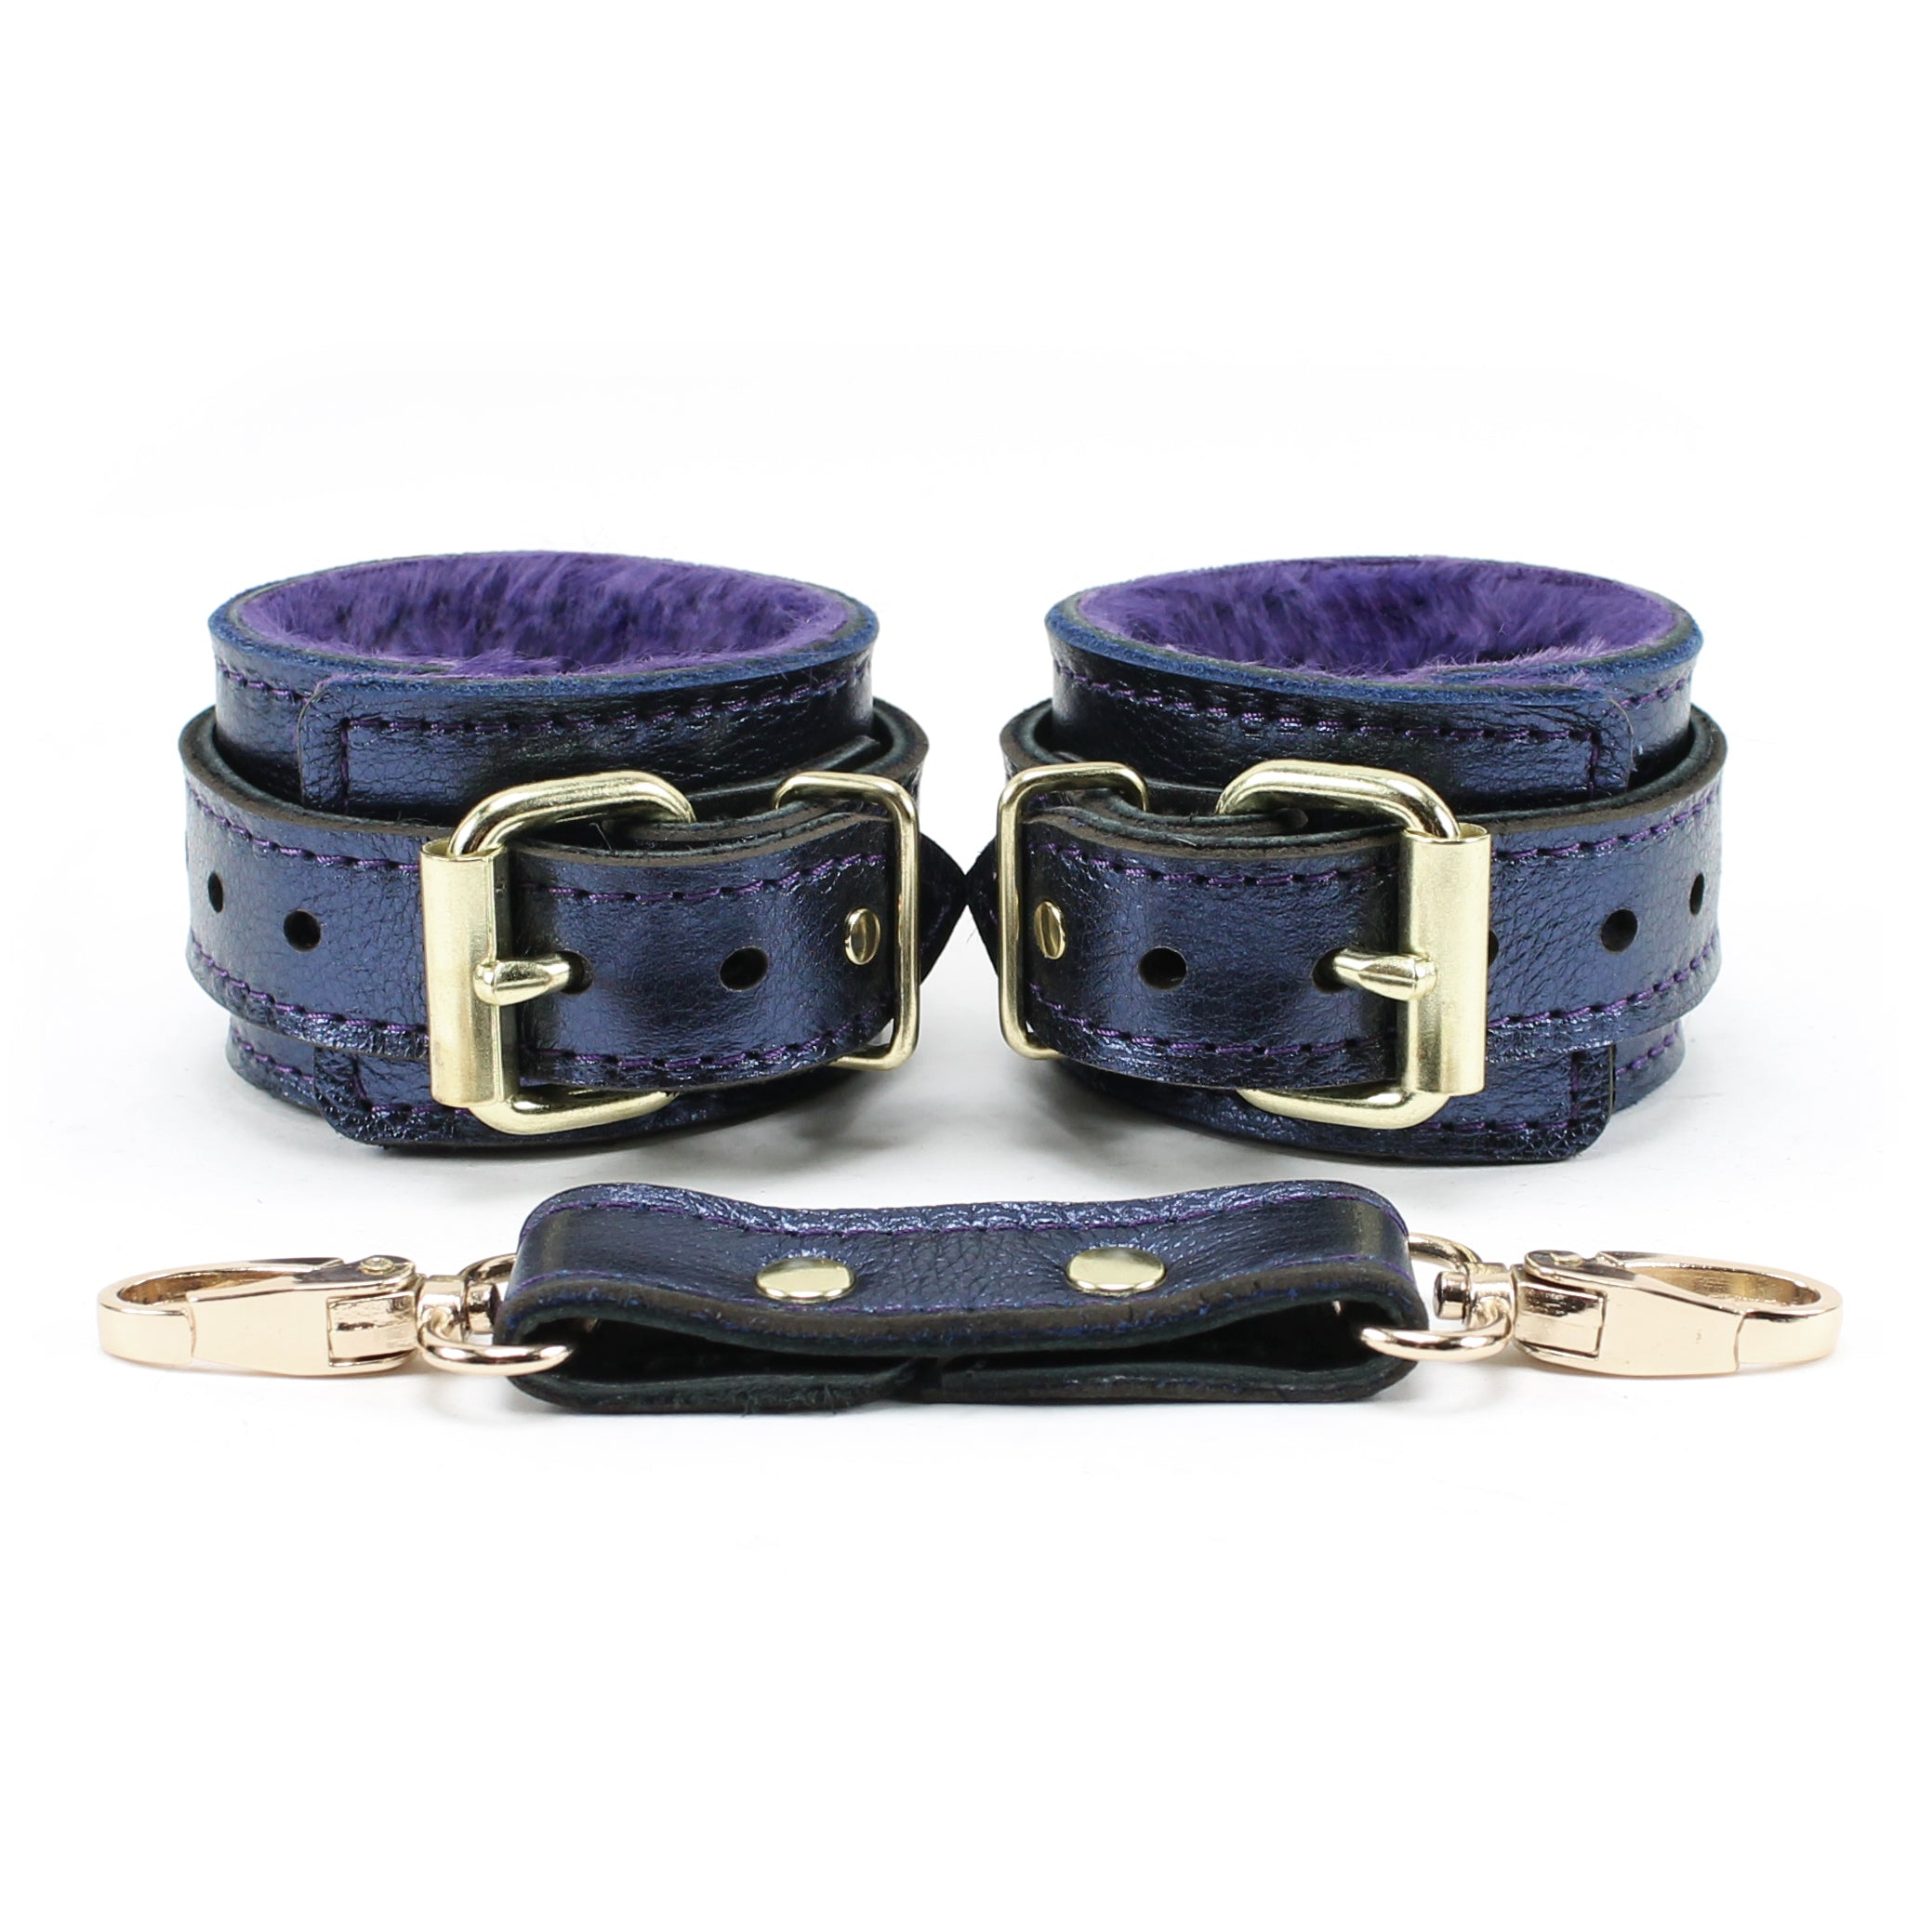 Special edition blue sapphire metallic leather bondage cuffs with cuff connector